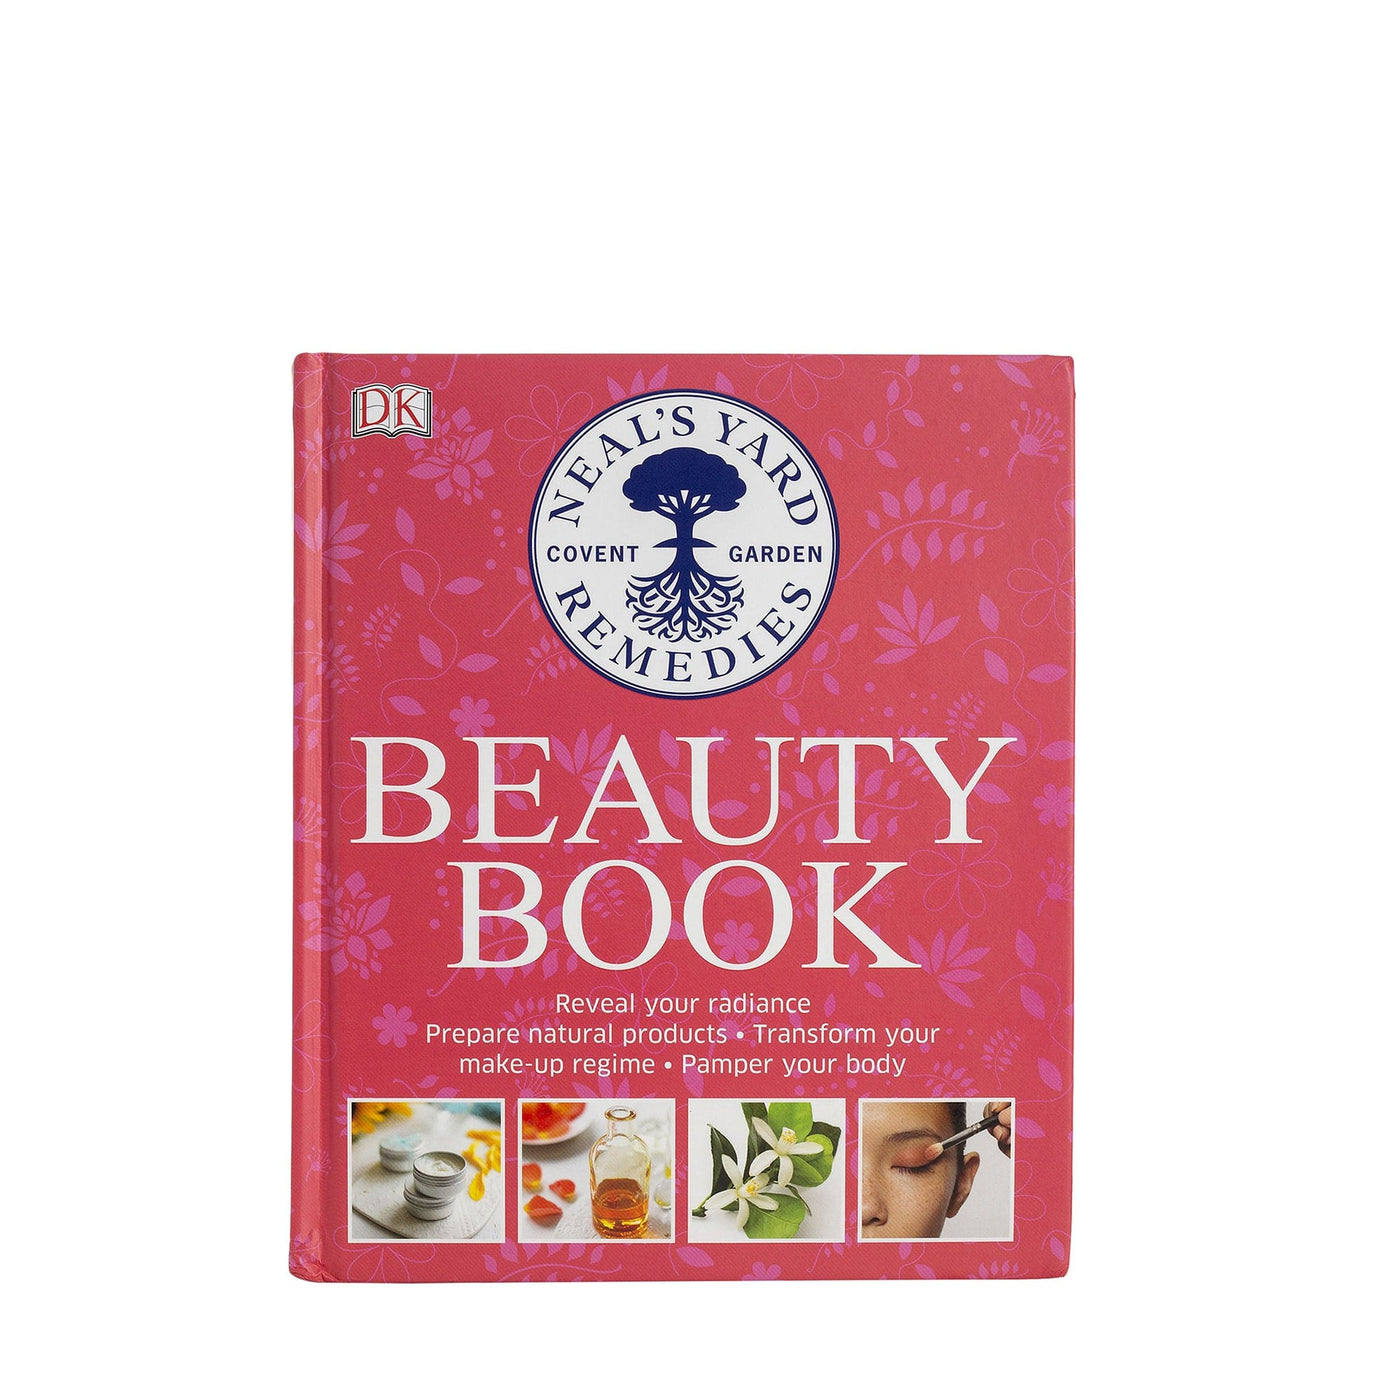 Neal's Yard Remedies NYR Beauty Book